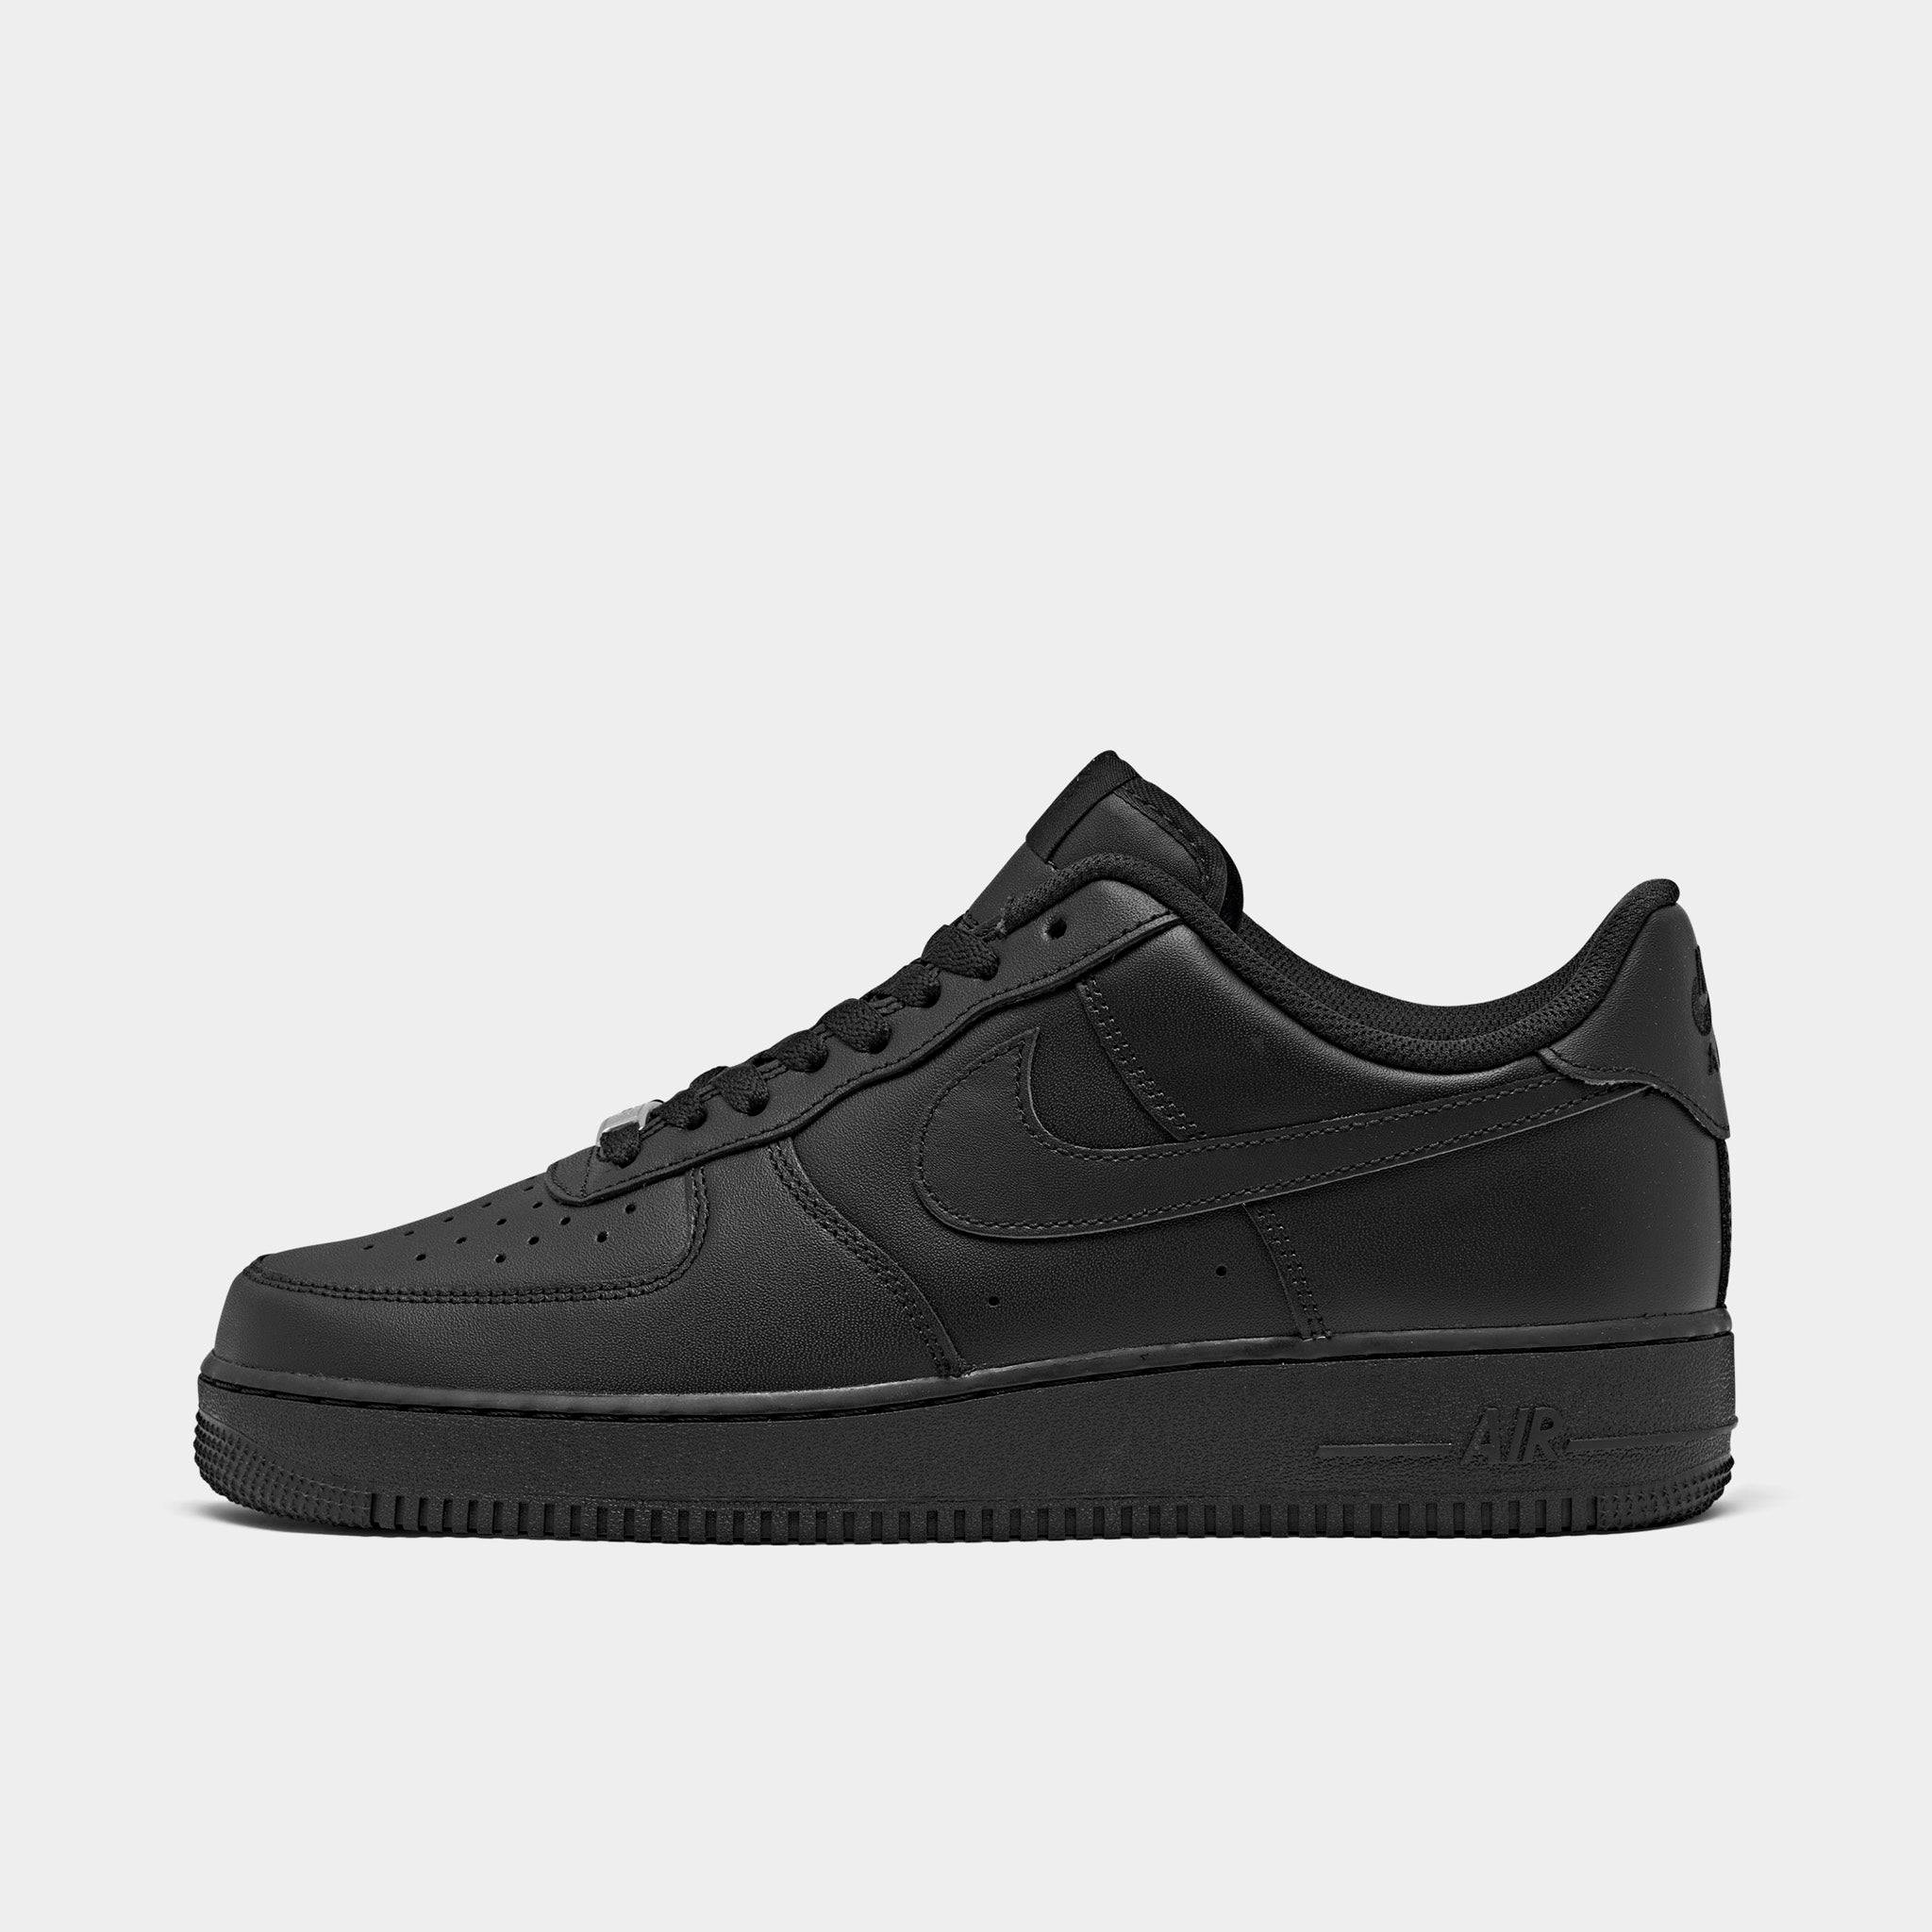 what's the deal with black air force 1